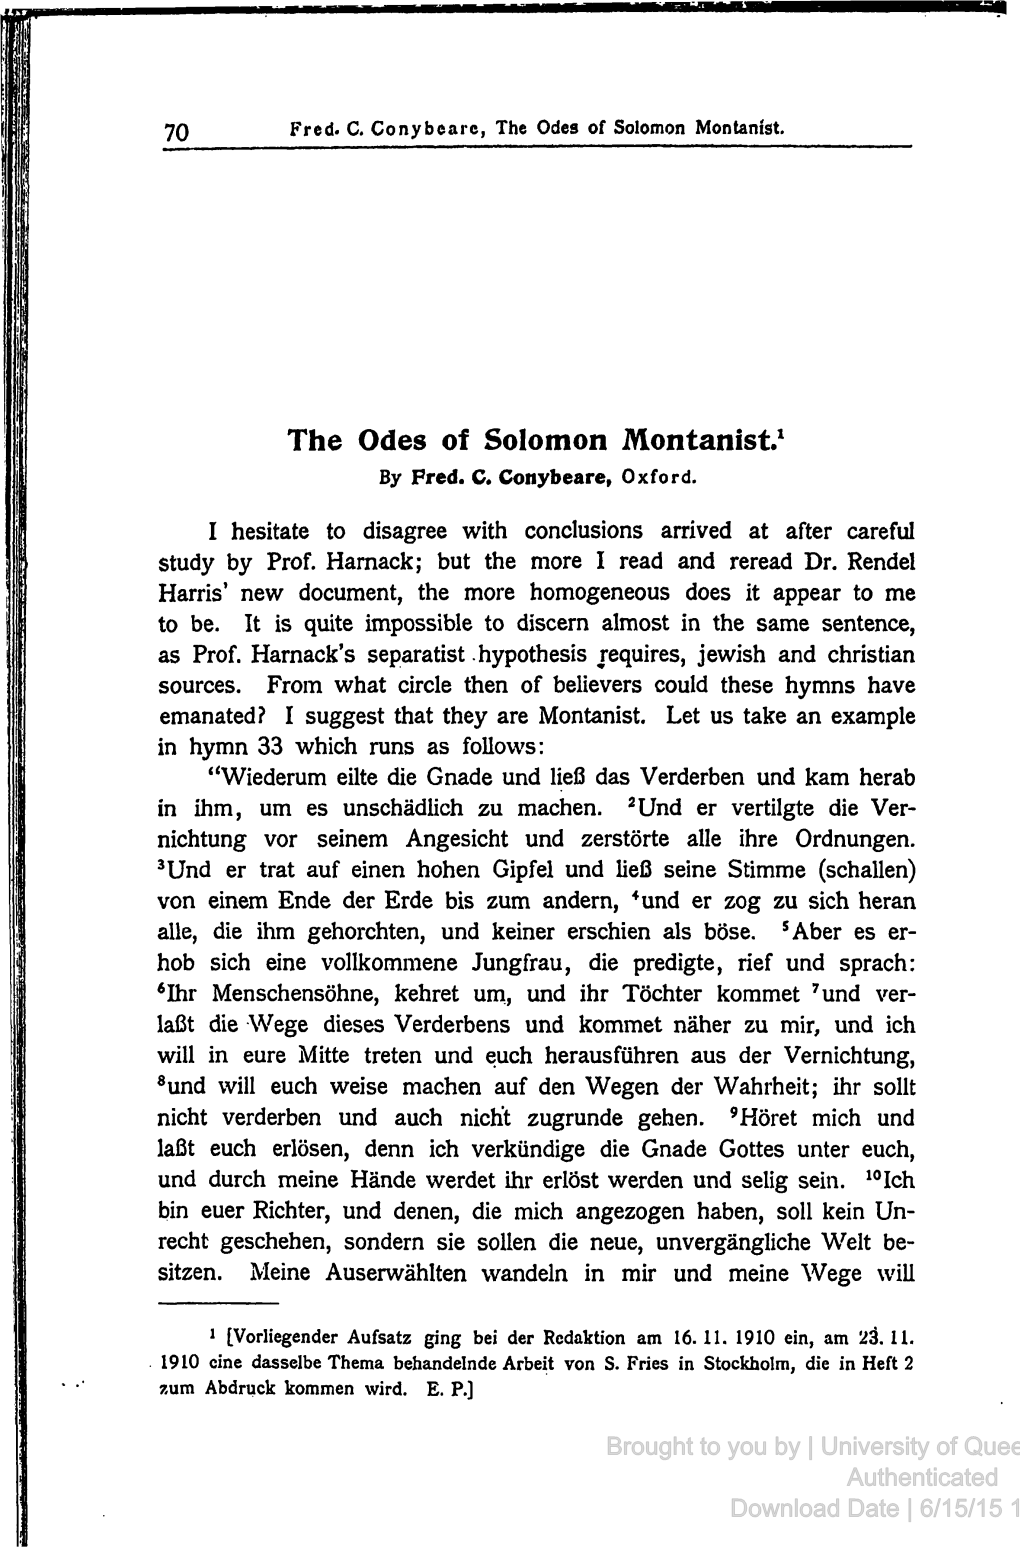 The Odes of Solomon Montanist.1 by Fred